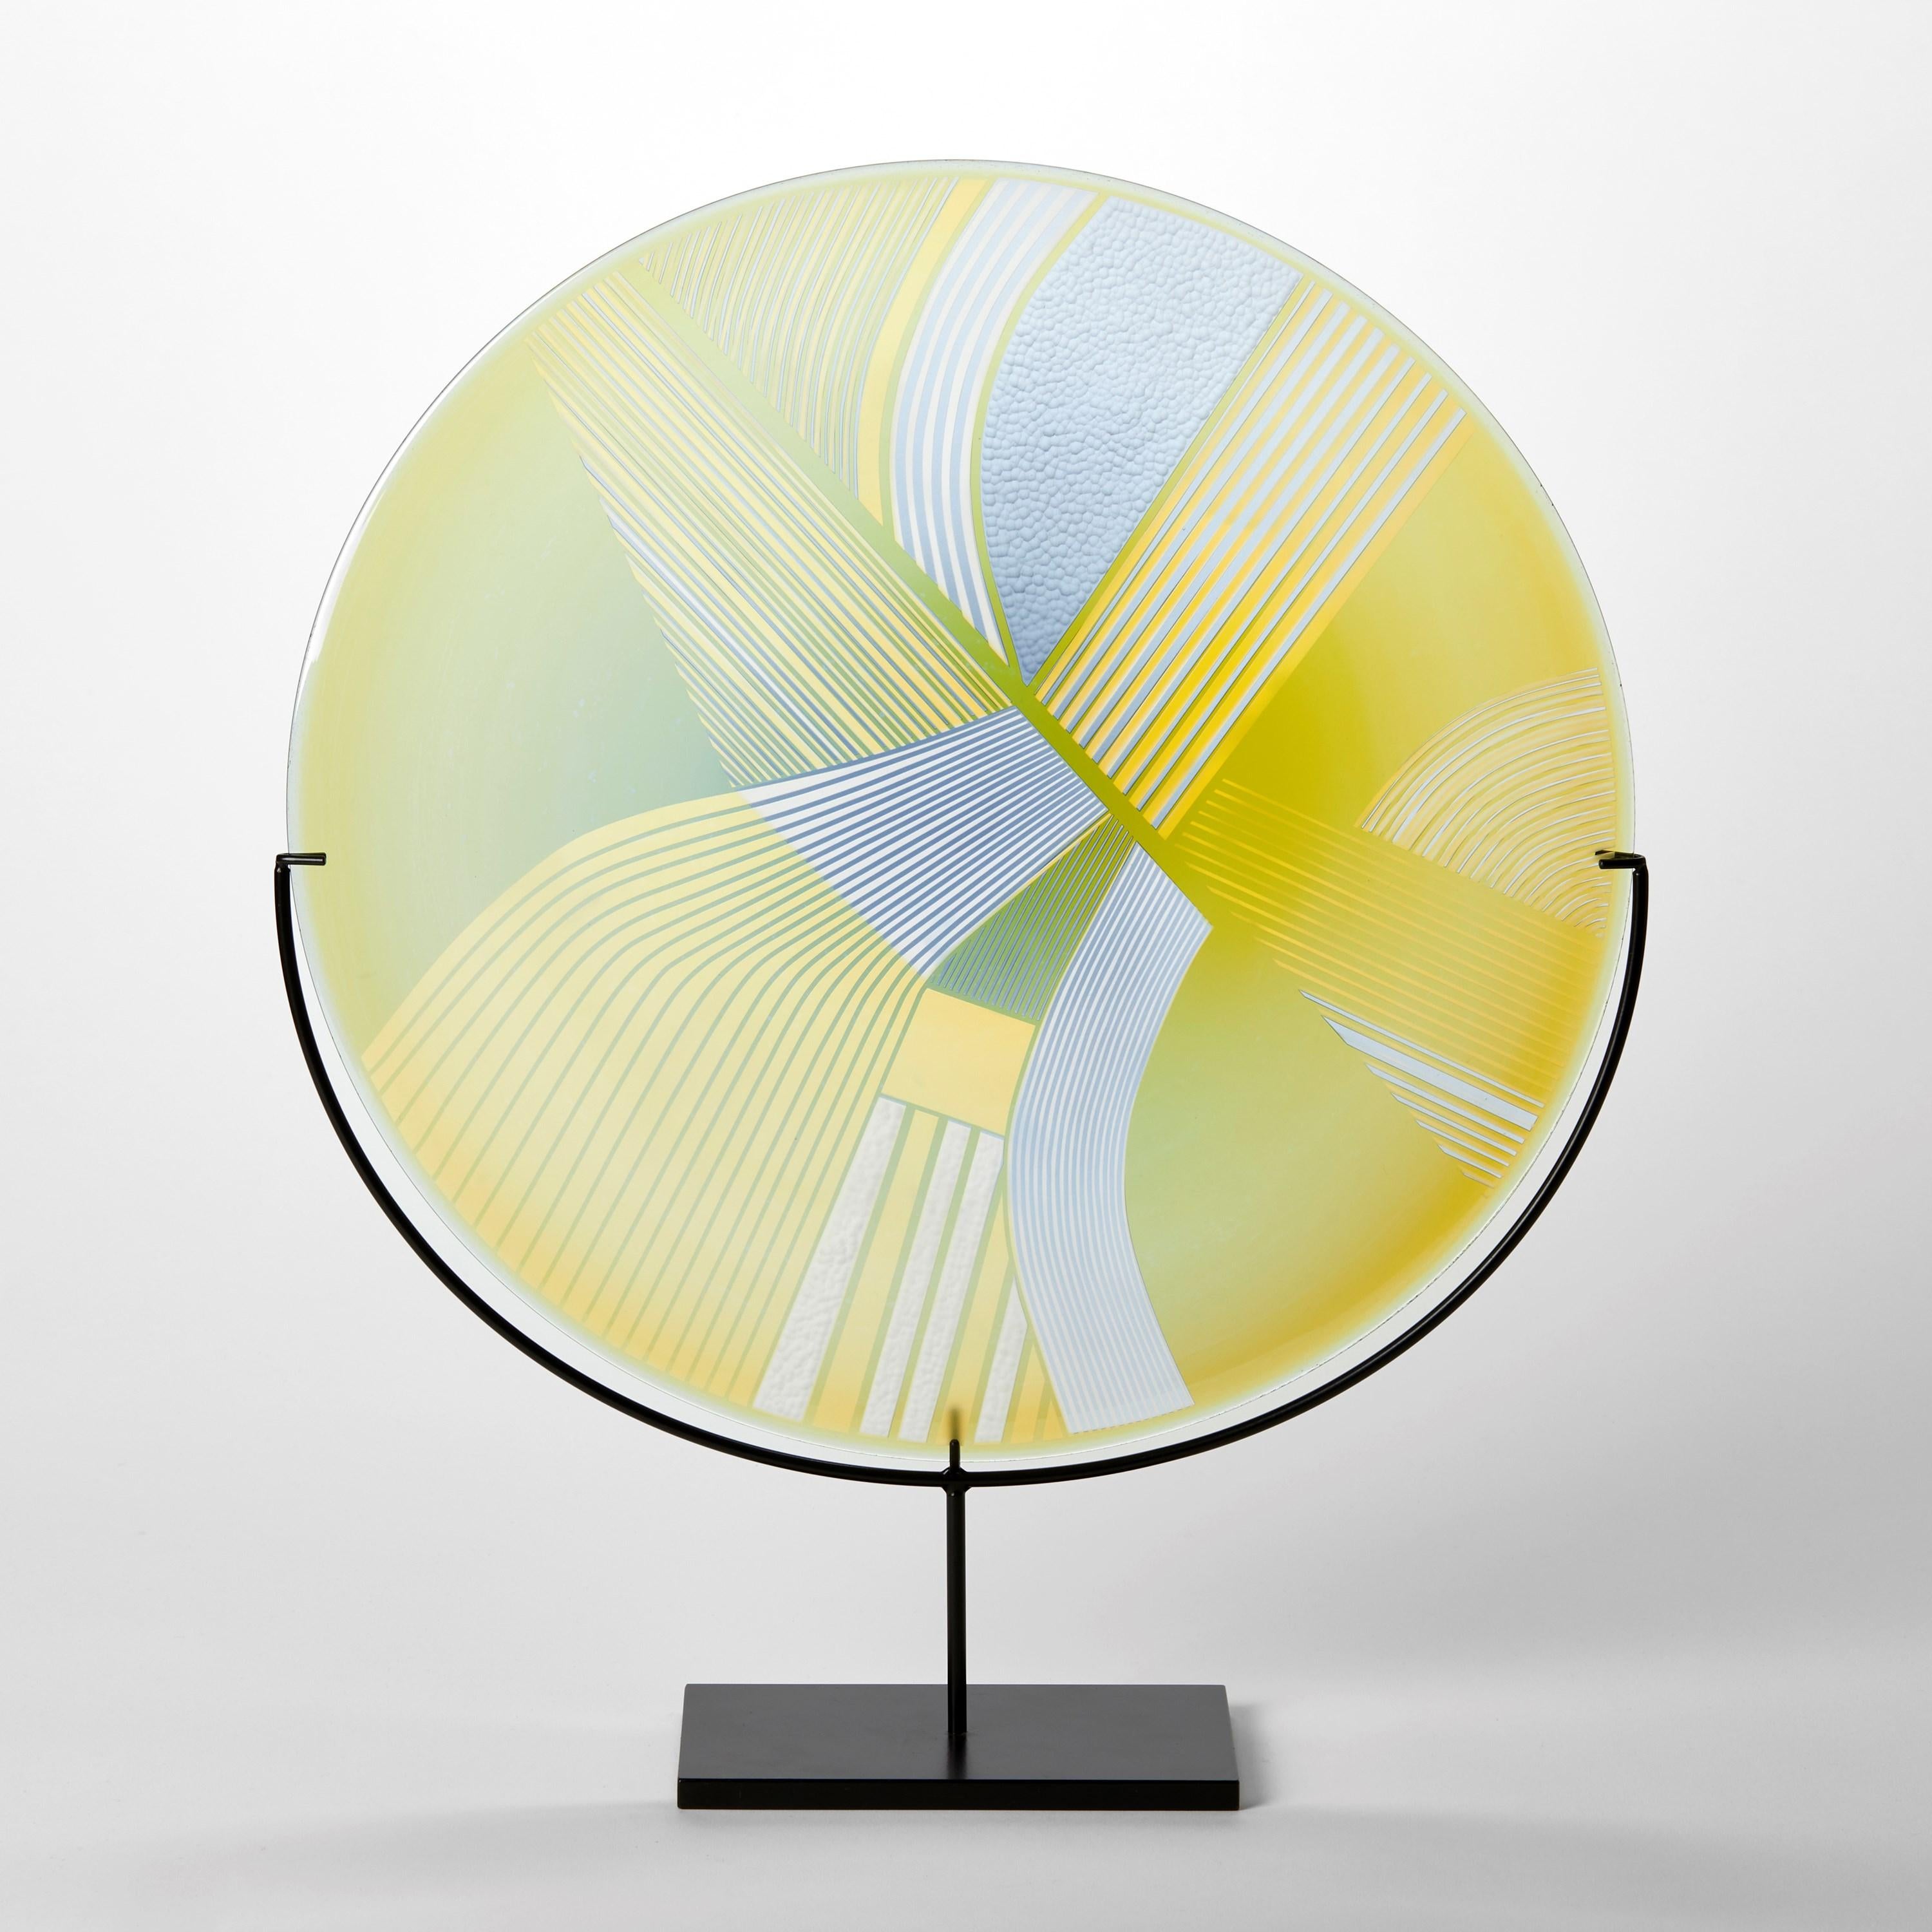 'Abstracted Land Yellow over Steel Blue' is a unique handblown and cut glass artwork by the British artist, Kate Jones of Gillies Jones.

In the artist's own words:

“This new body of work references both the evident structure of the landscape and